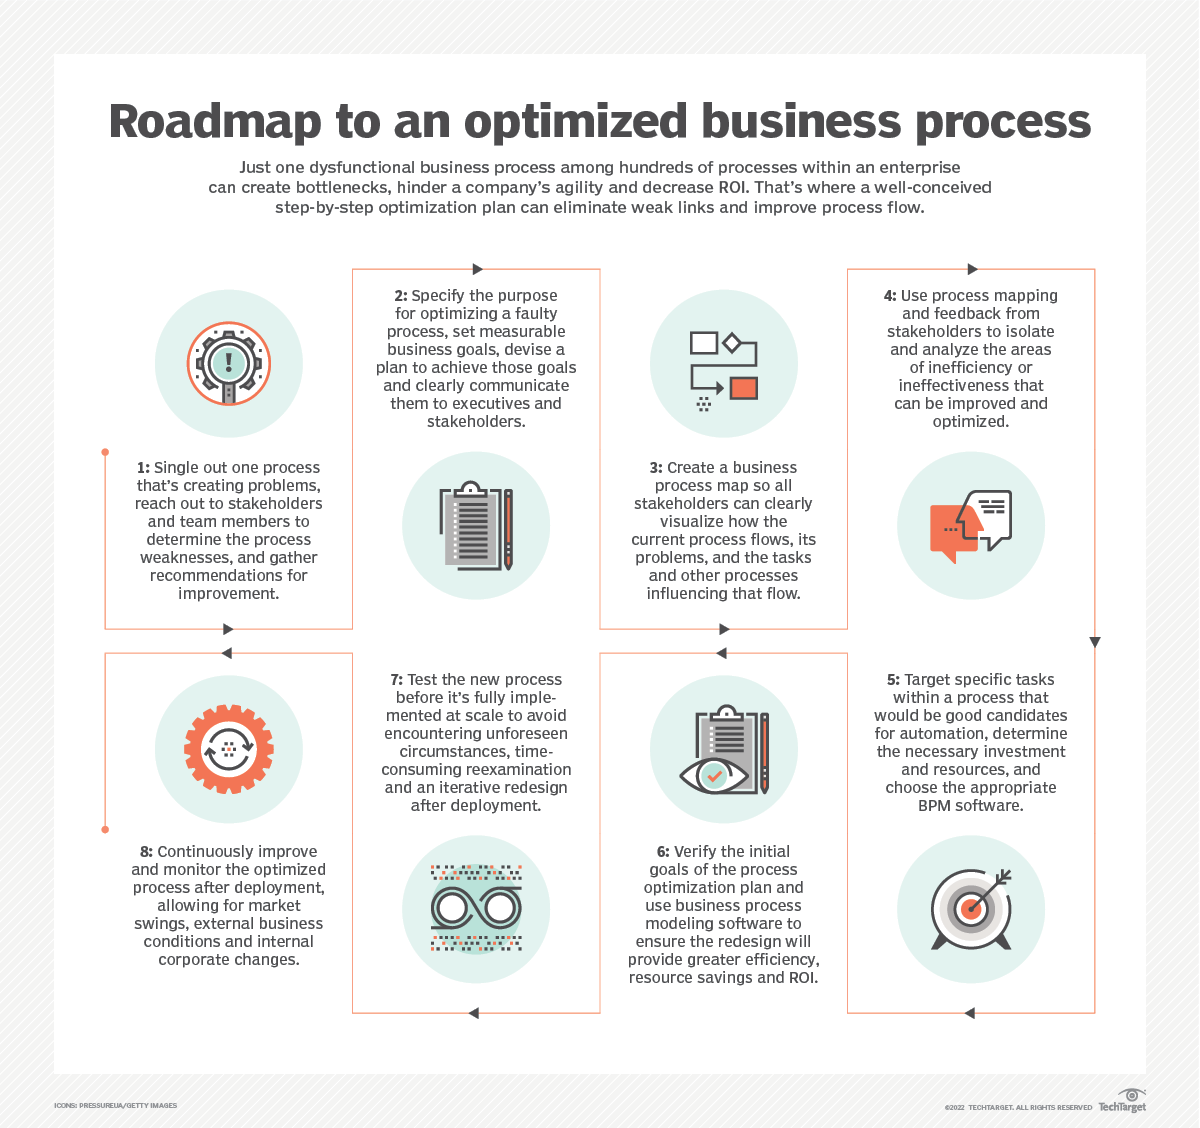 Roadmap to an optimized business process